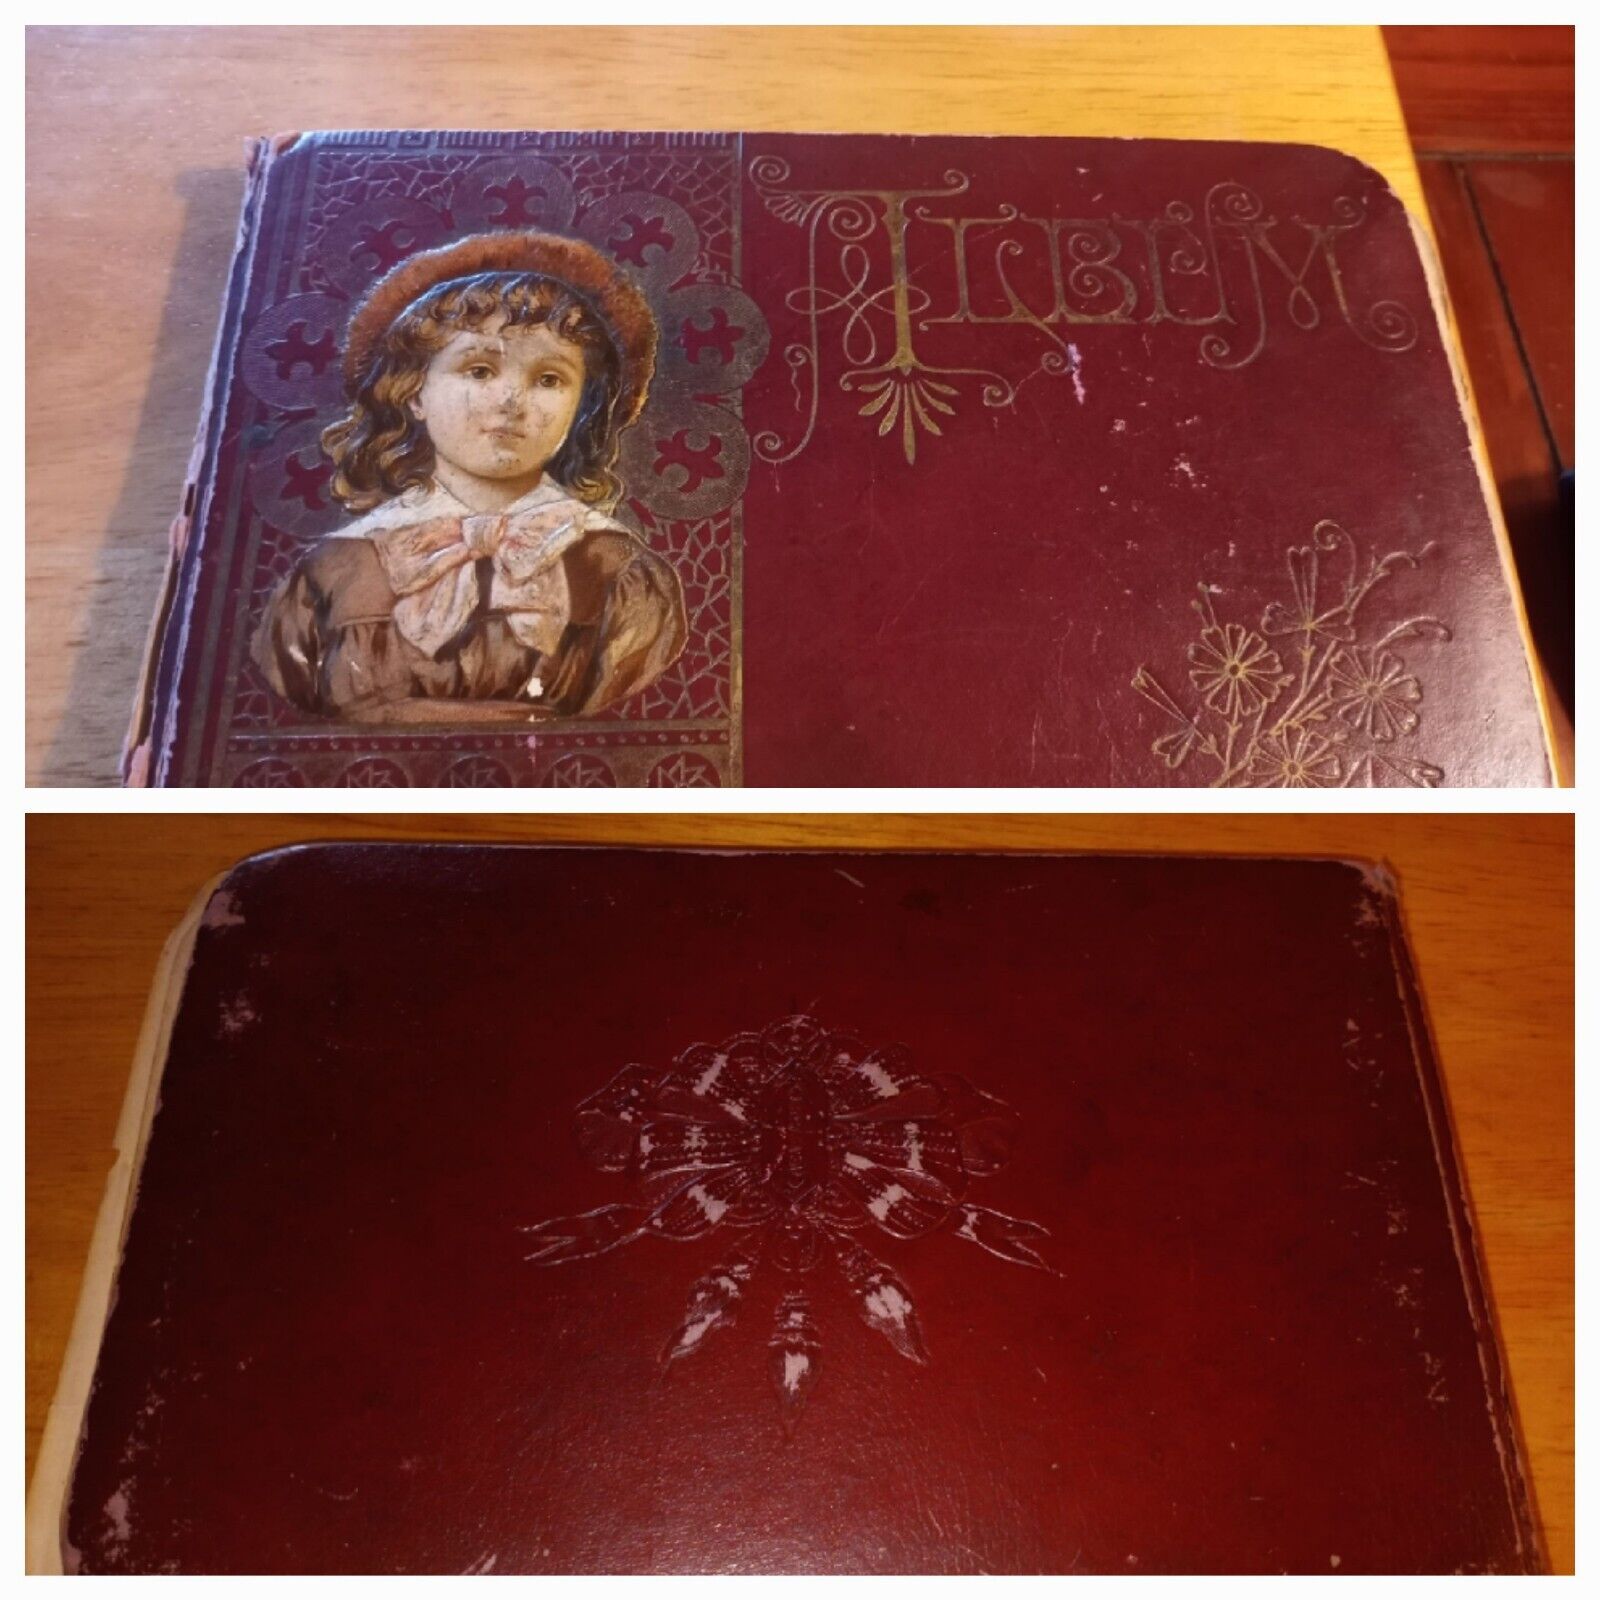 Antique 1800s Autograph Album Around 65 Signatures Of People, Could Be Important